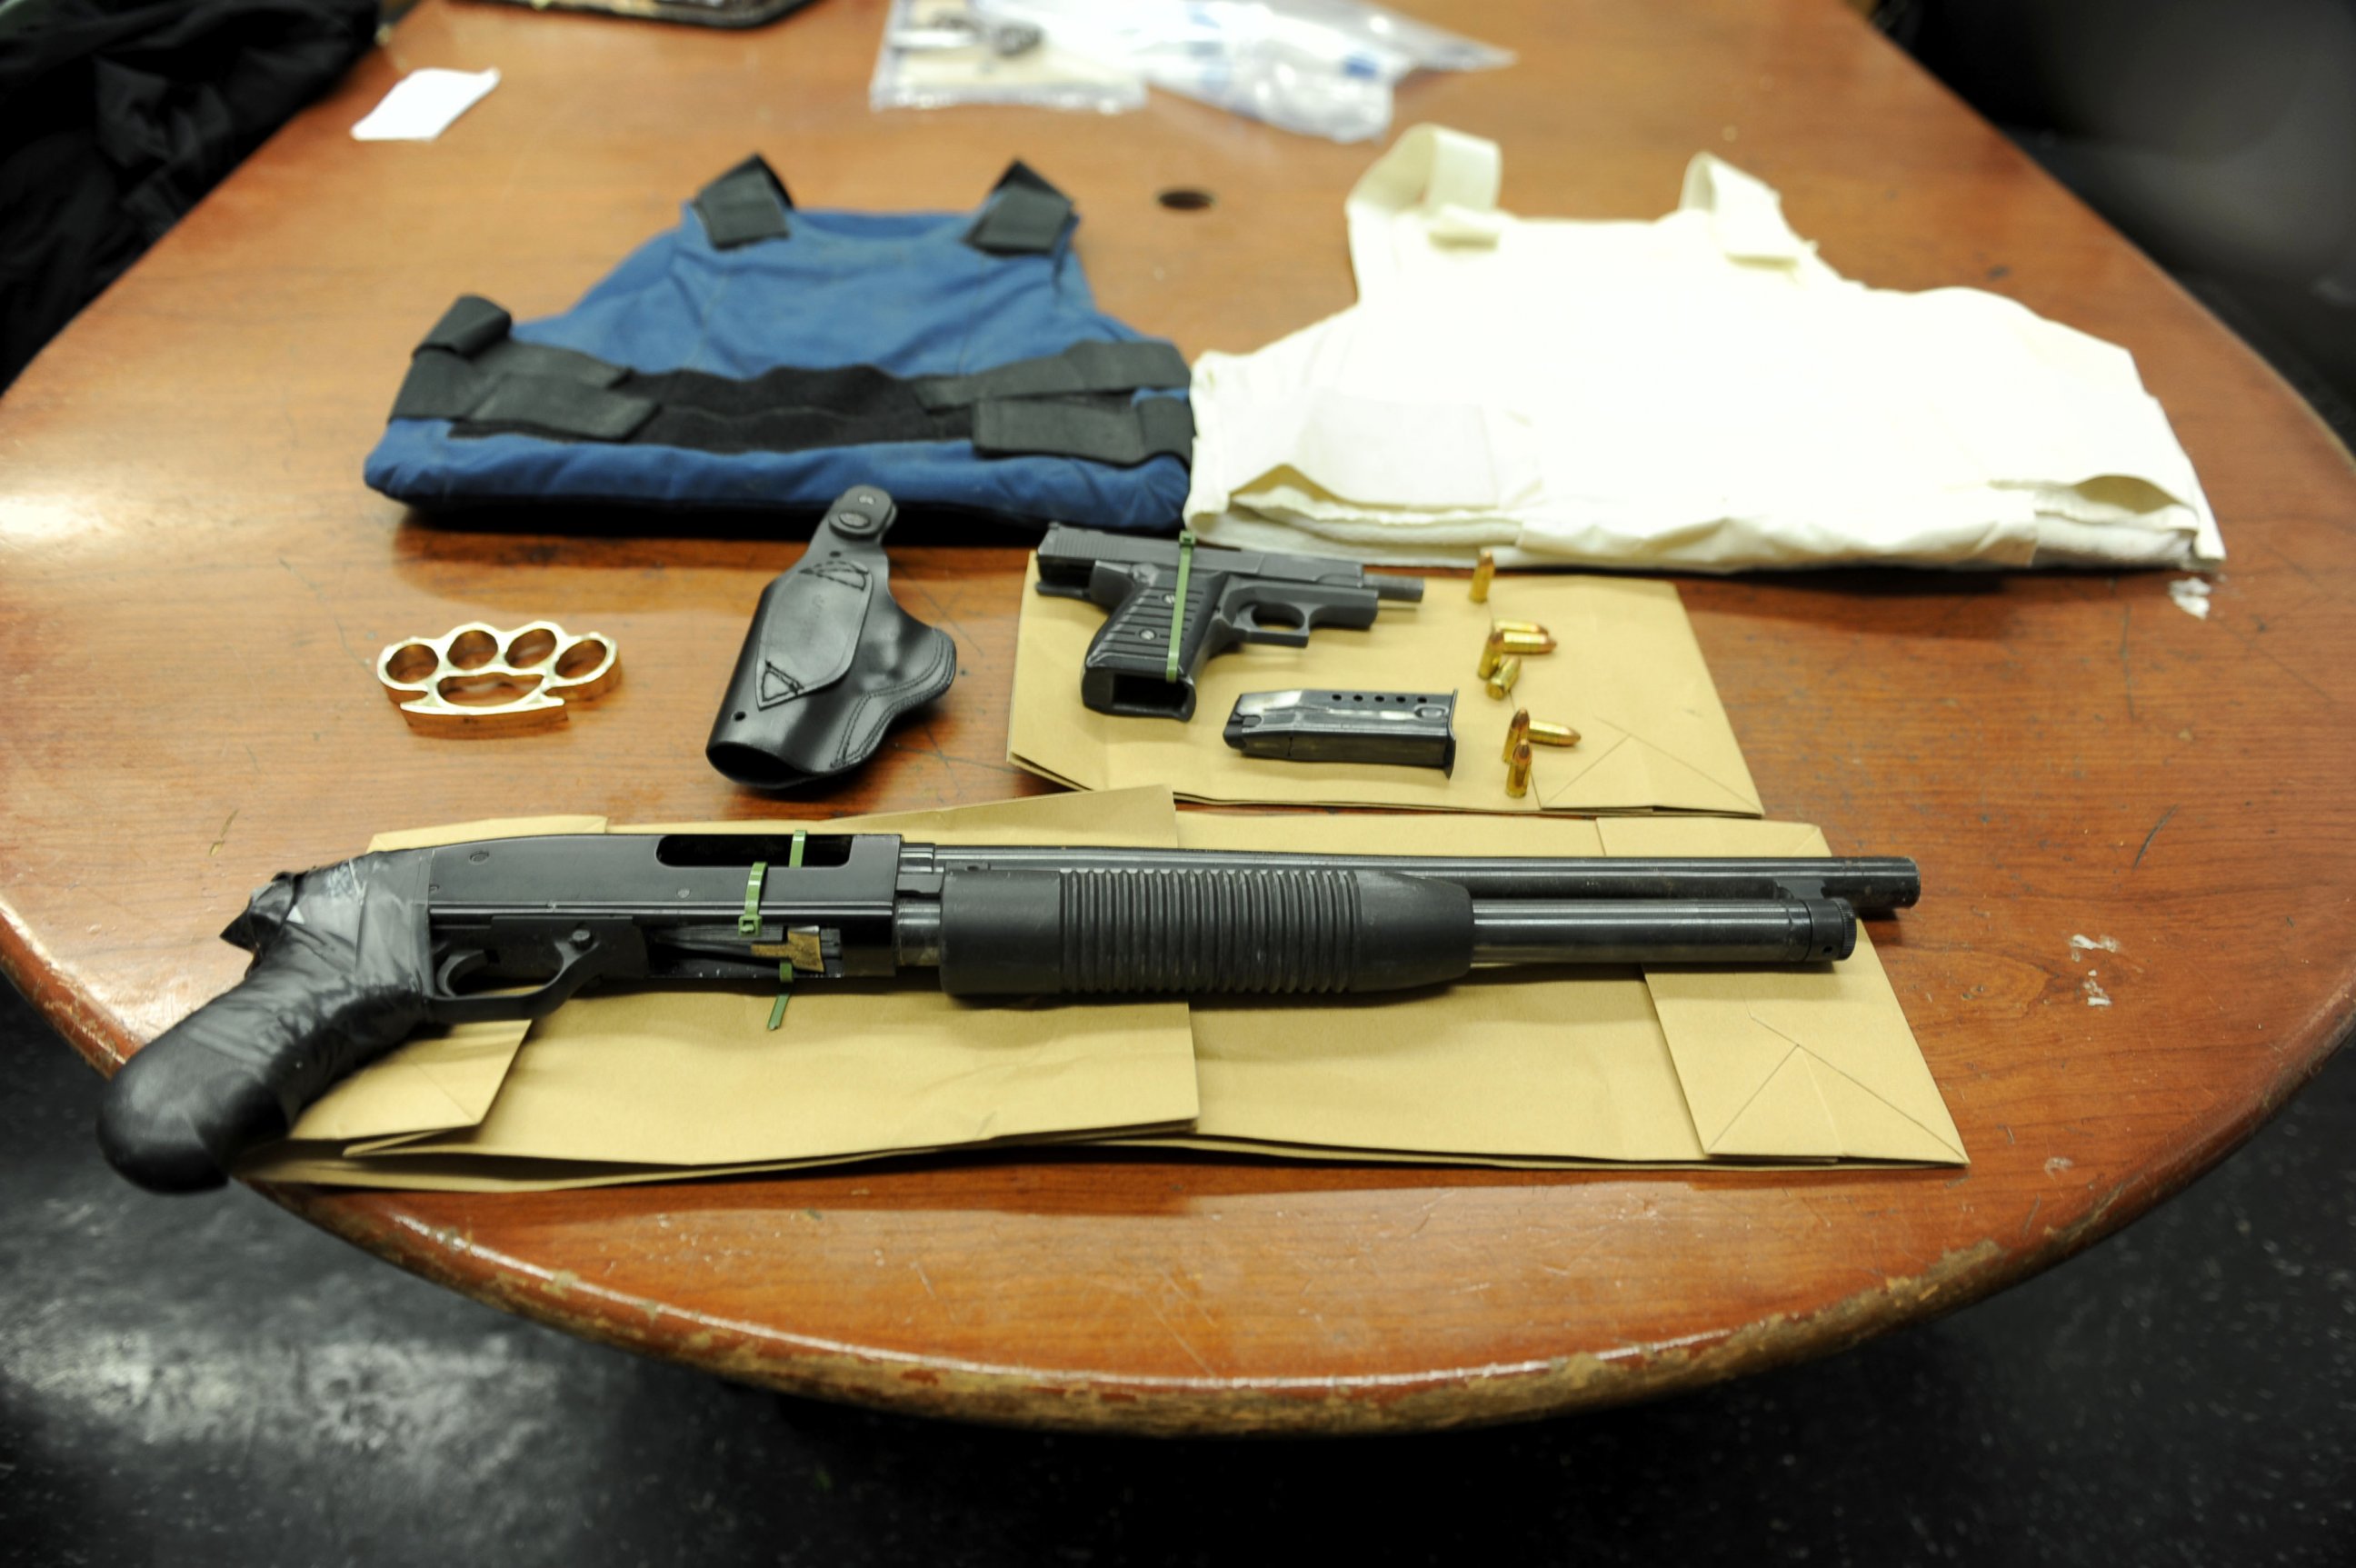 PHOTO: The NYPD said these weapons were confiscated from a suspect who was overheard making threats about killing police.